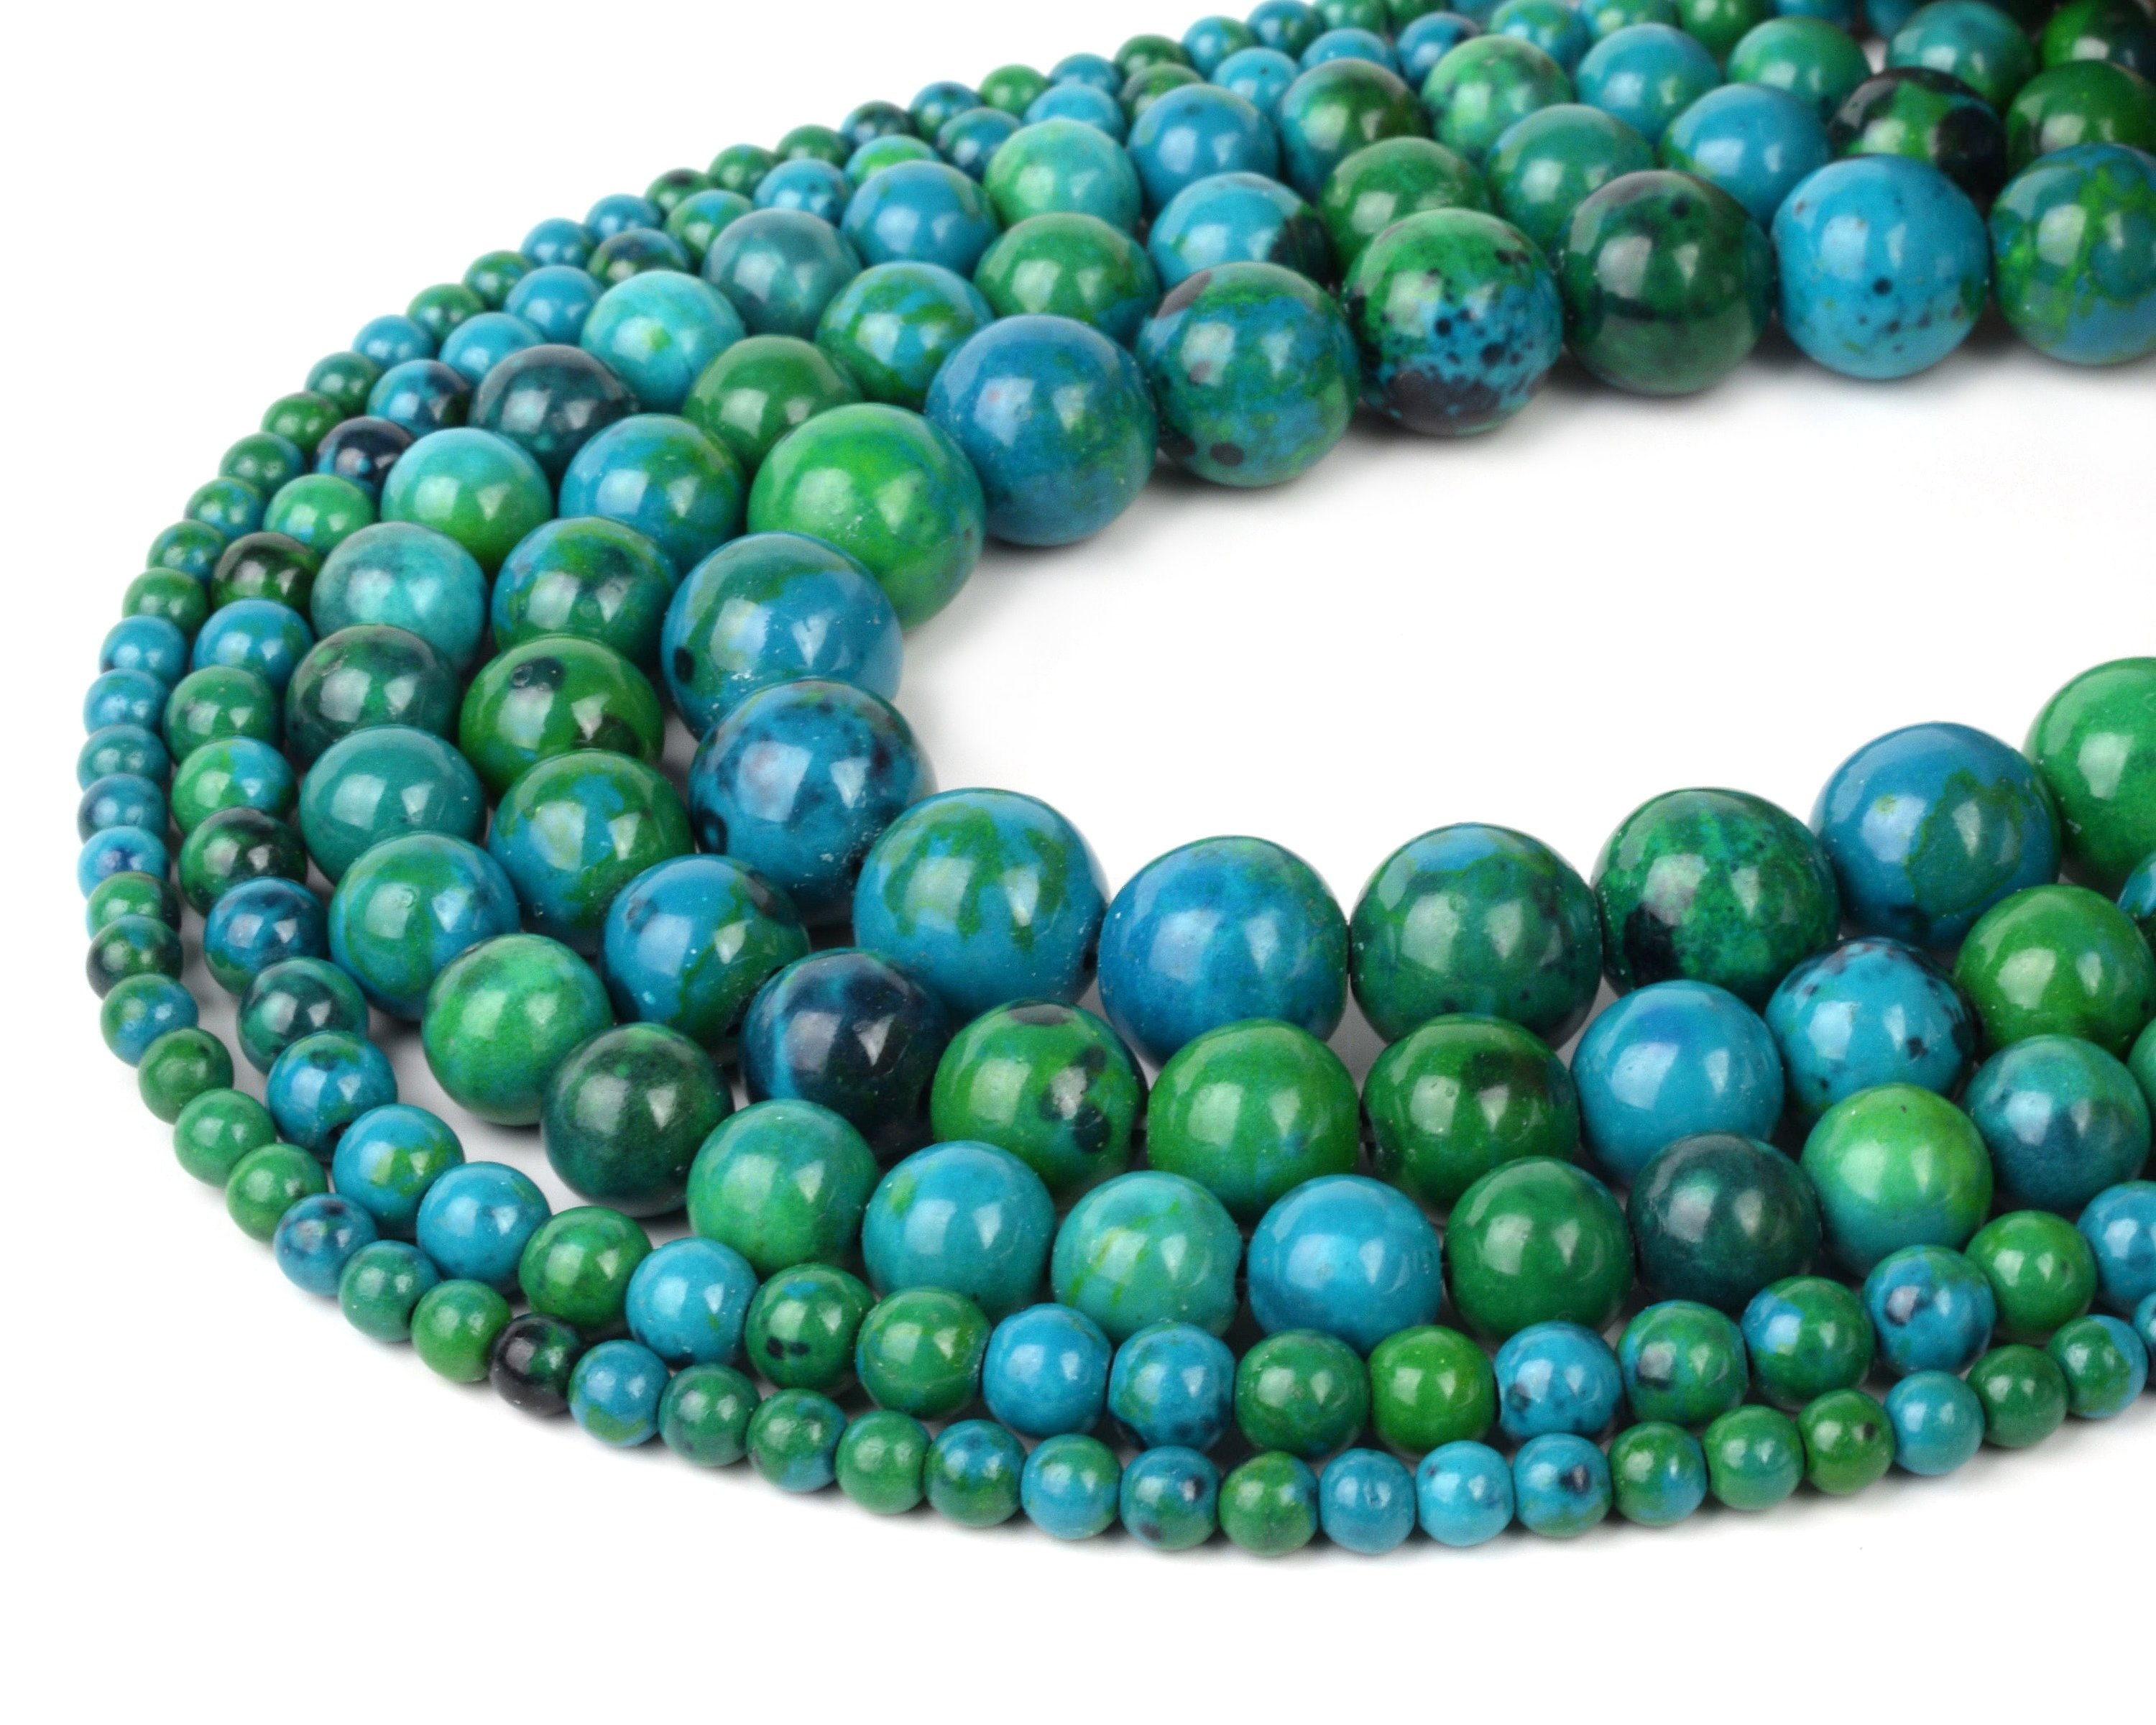 8mm Green Round Chrysocolla Loose Beads for Jewelry Making Strand 15" 